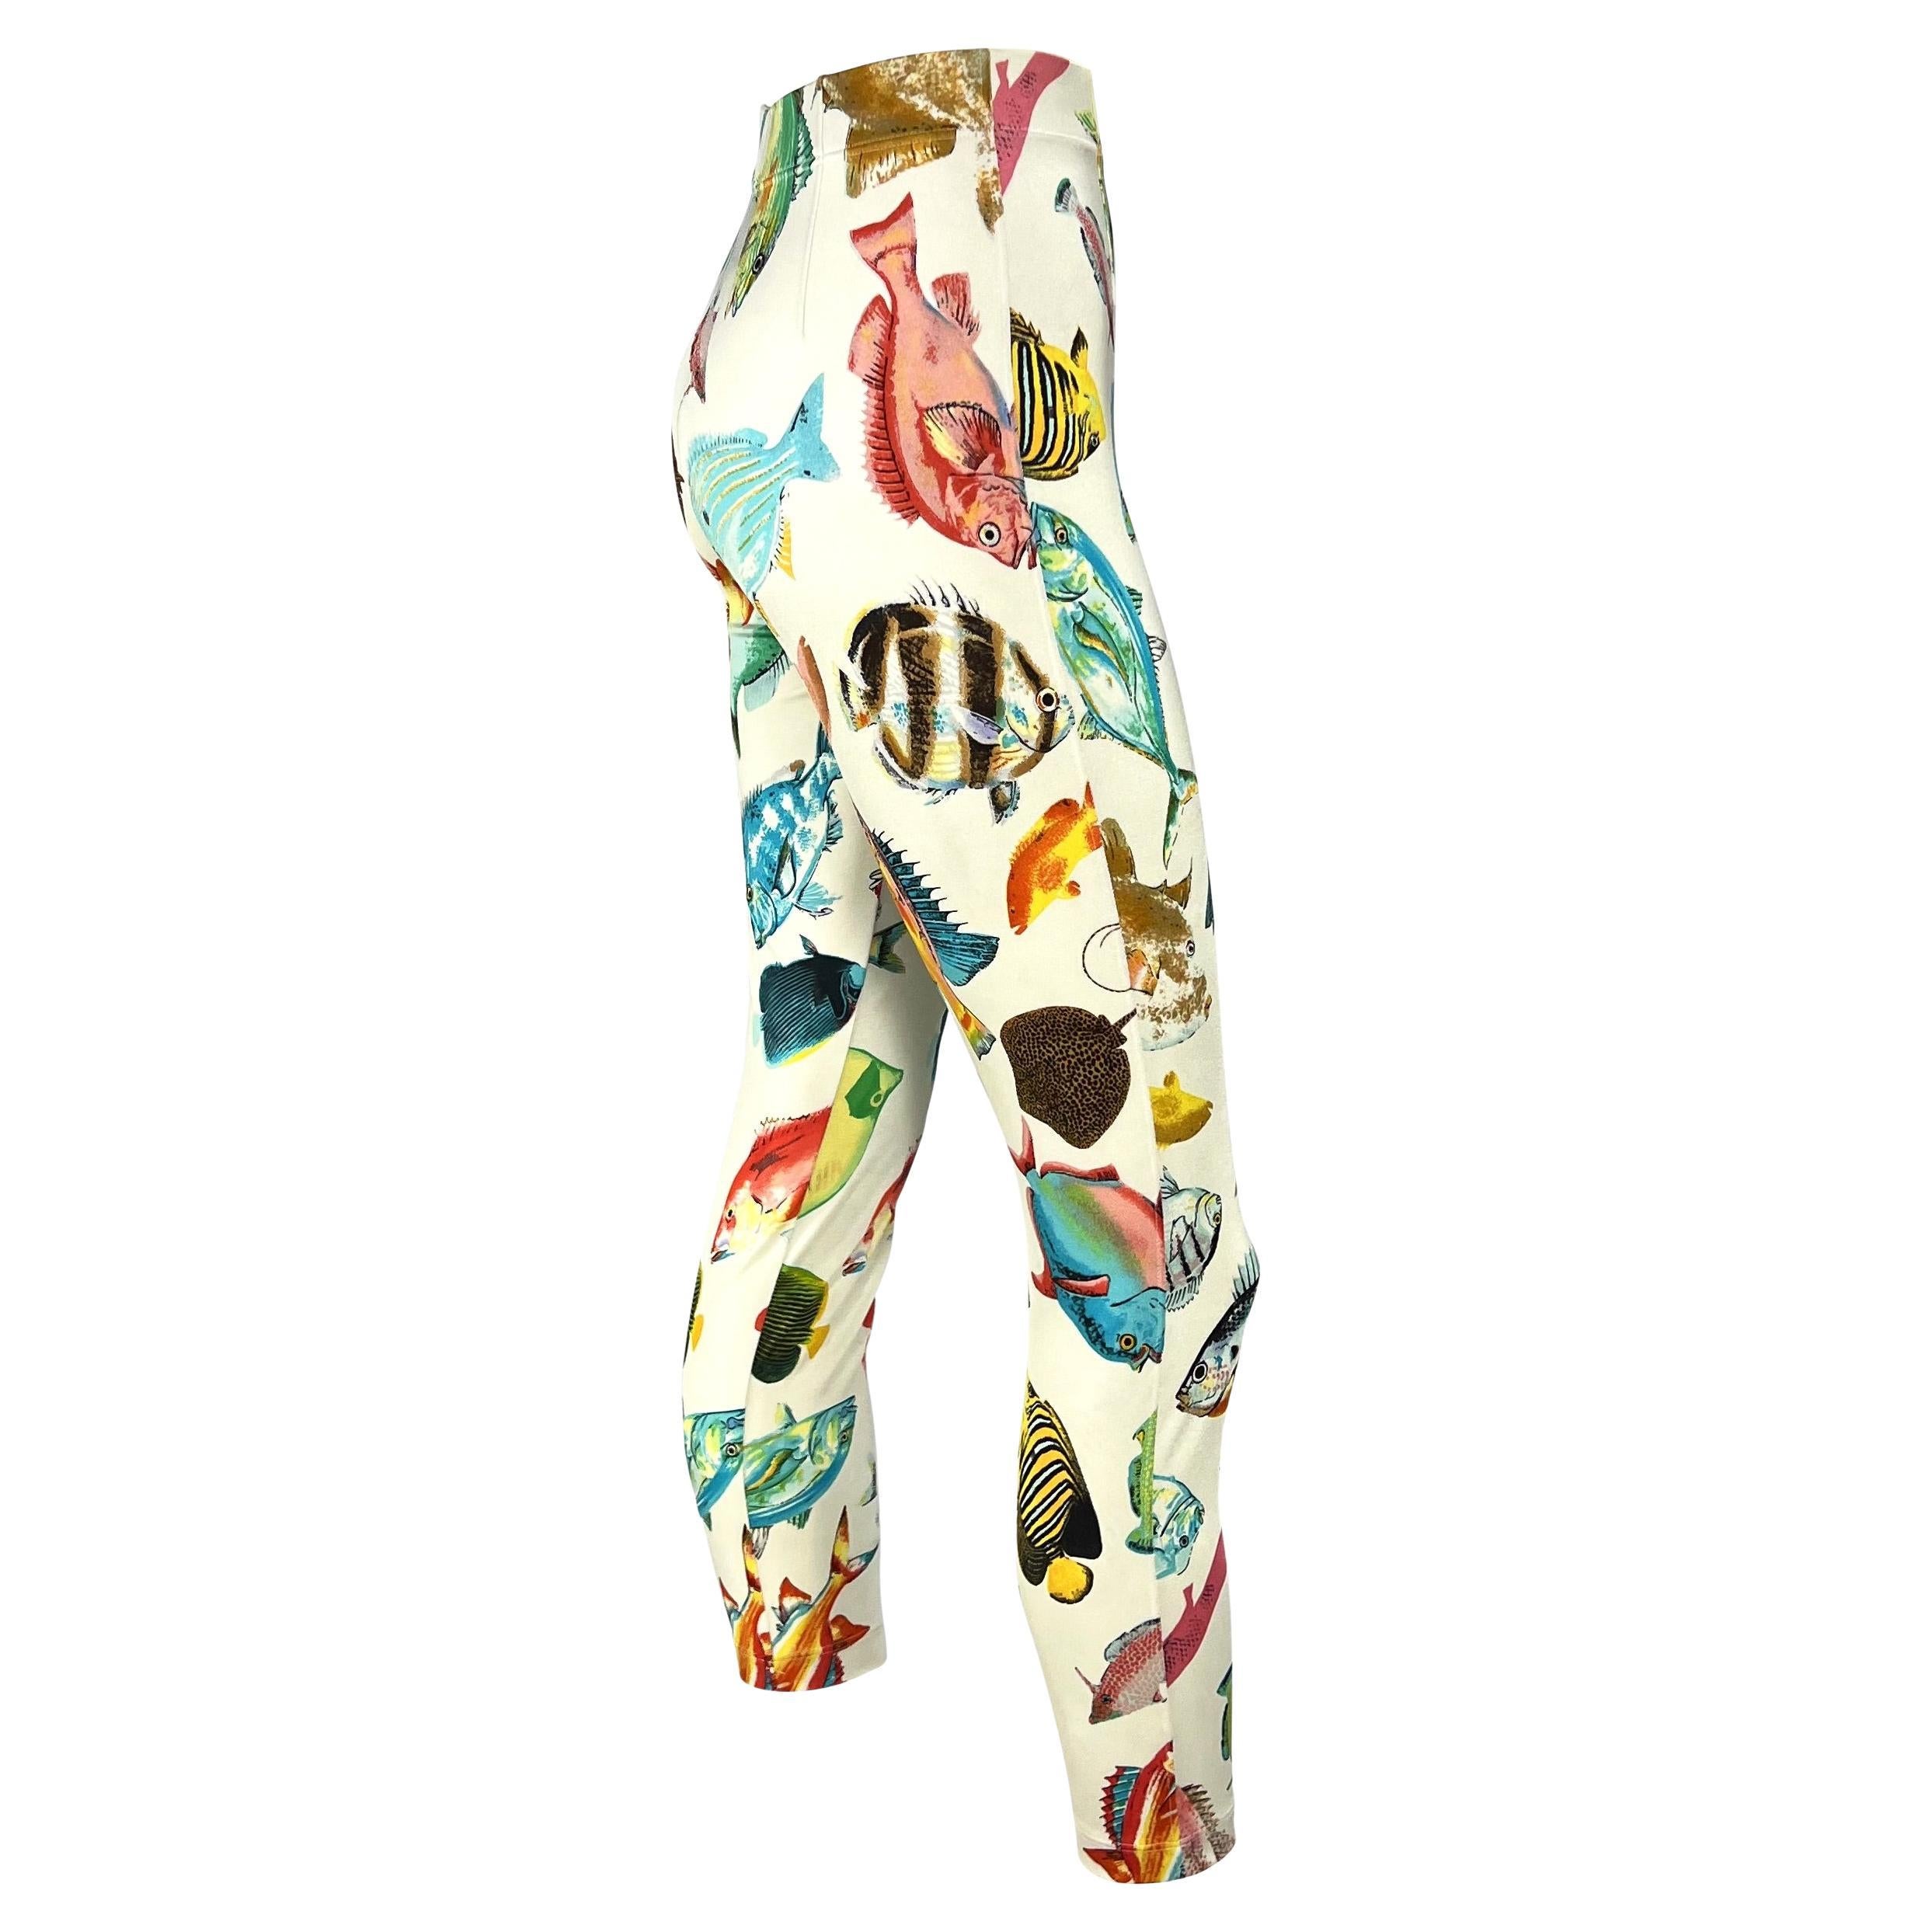 S/S 1992 Gucci White Stretch Sea Life Fish Print Legging Pants In Good Condition For Sale In West Hollywood, CA